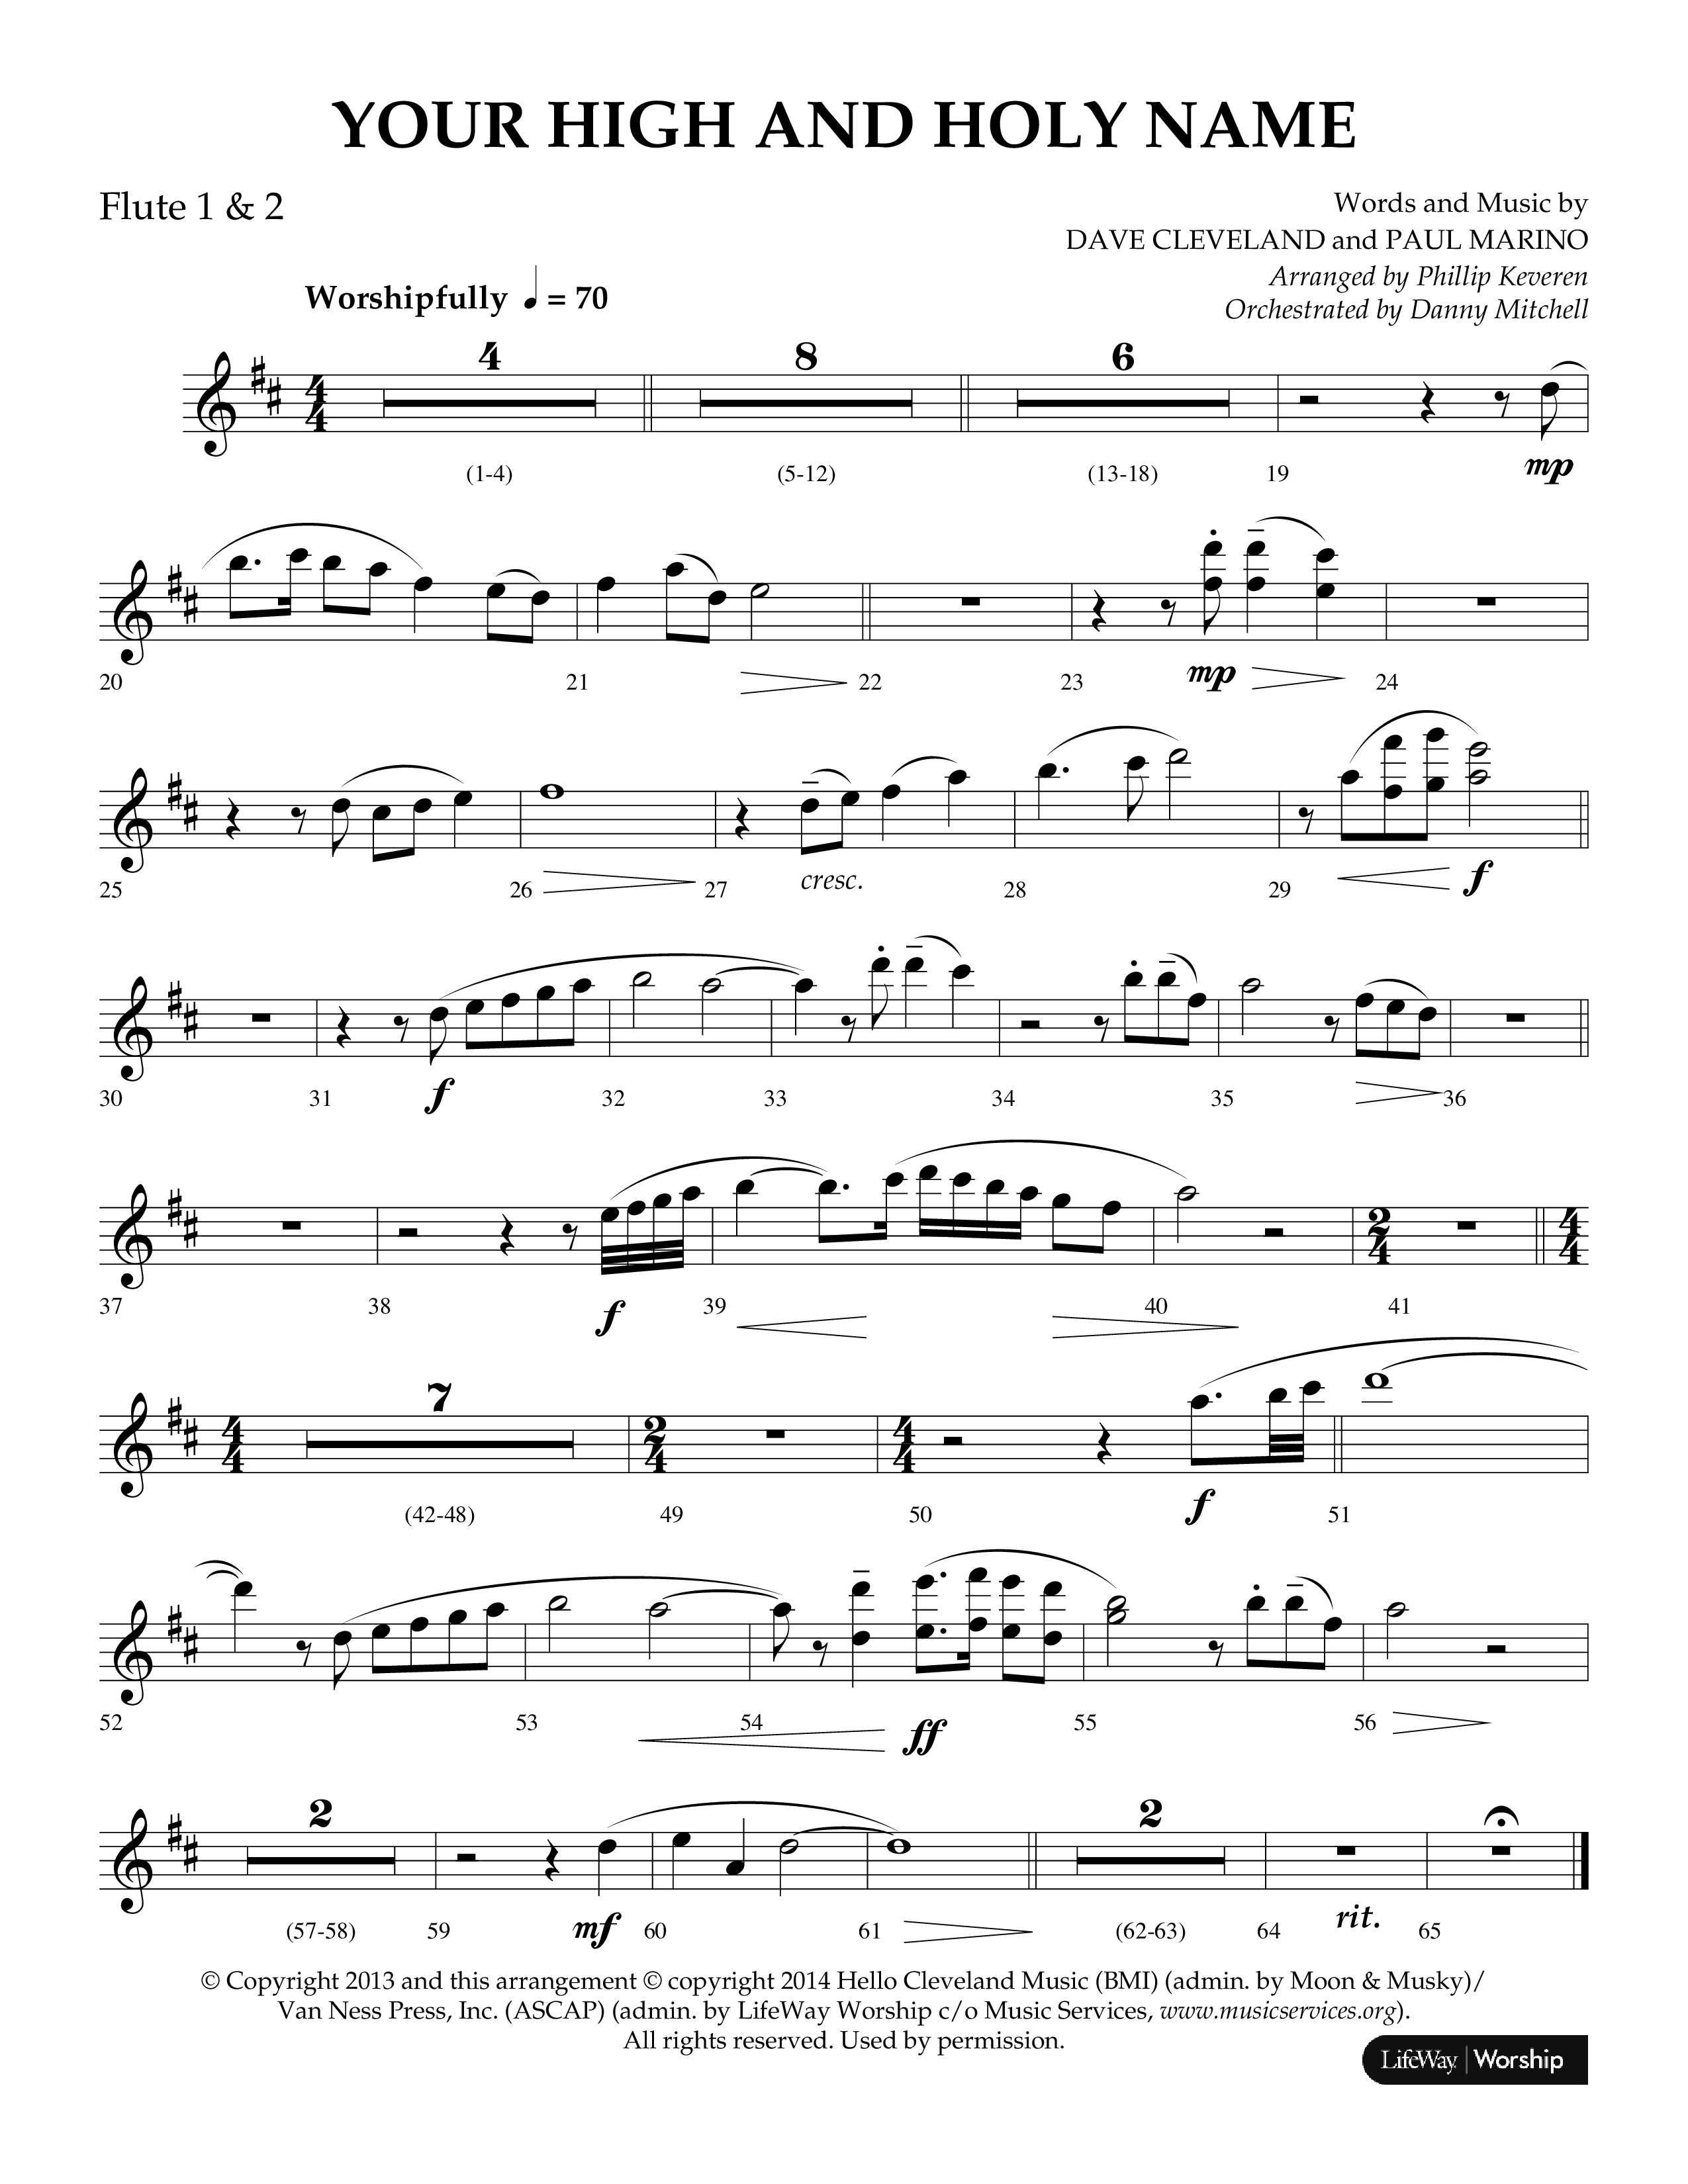 Your High And Holy Name (Choral Anthem SATB) Flute 1/2 (Lifeway Choral / Arr. Phillip Keveren / Orch. Danny Mitchell)